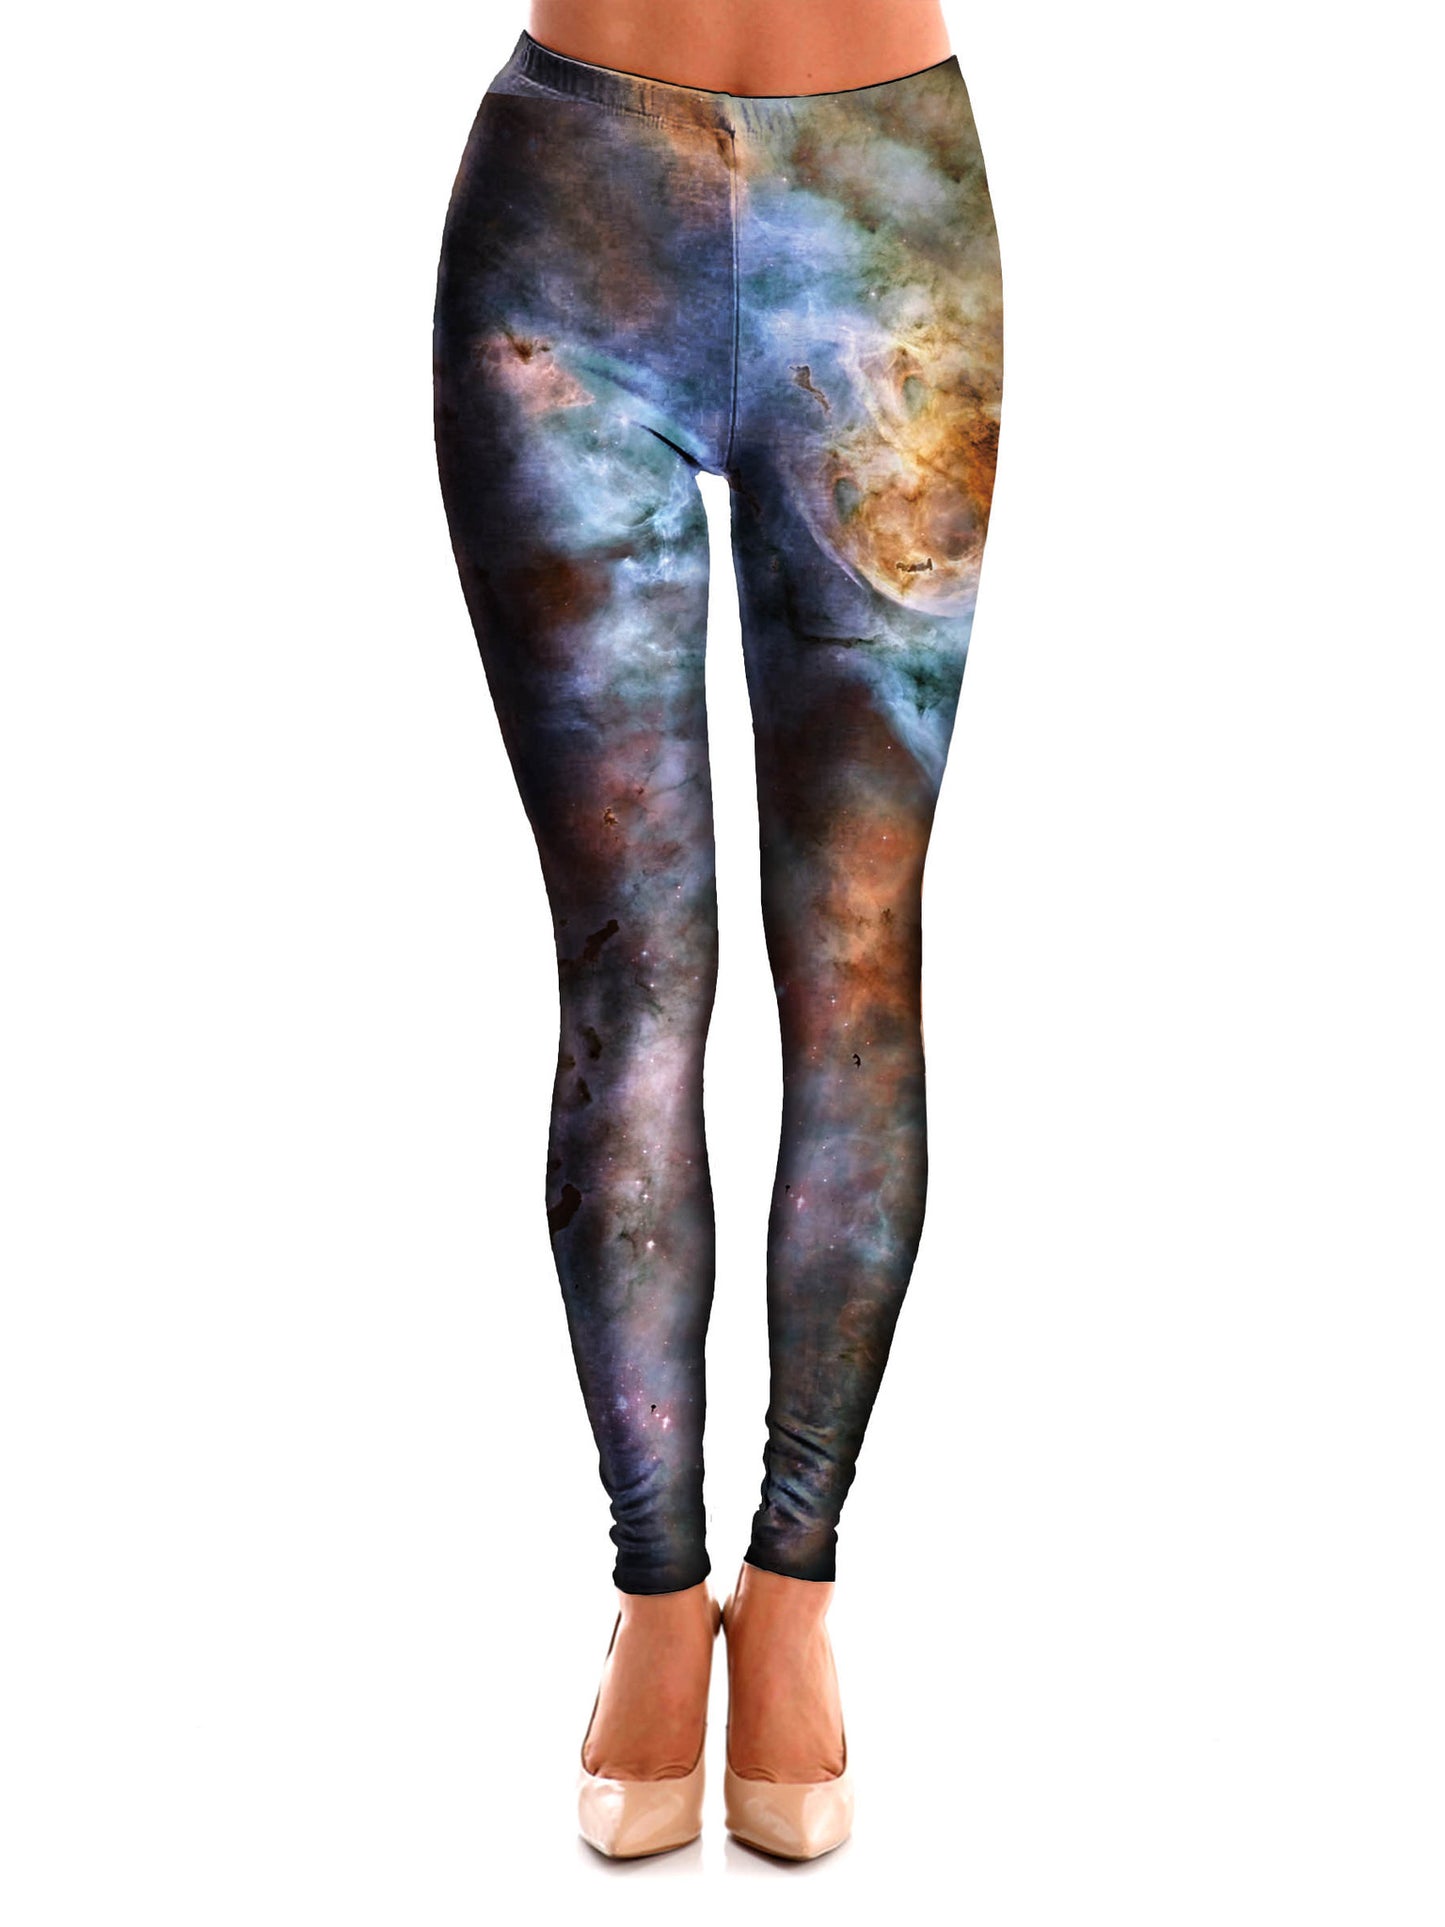 Abstracted Nebula Space Leggings - GratefullyDyed - 1